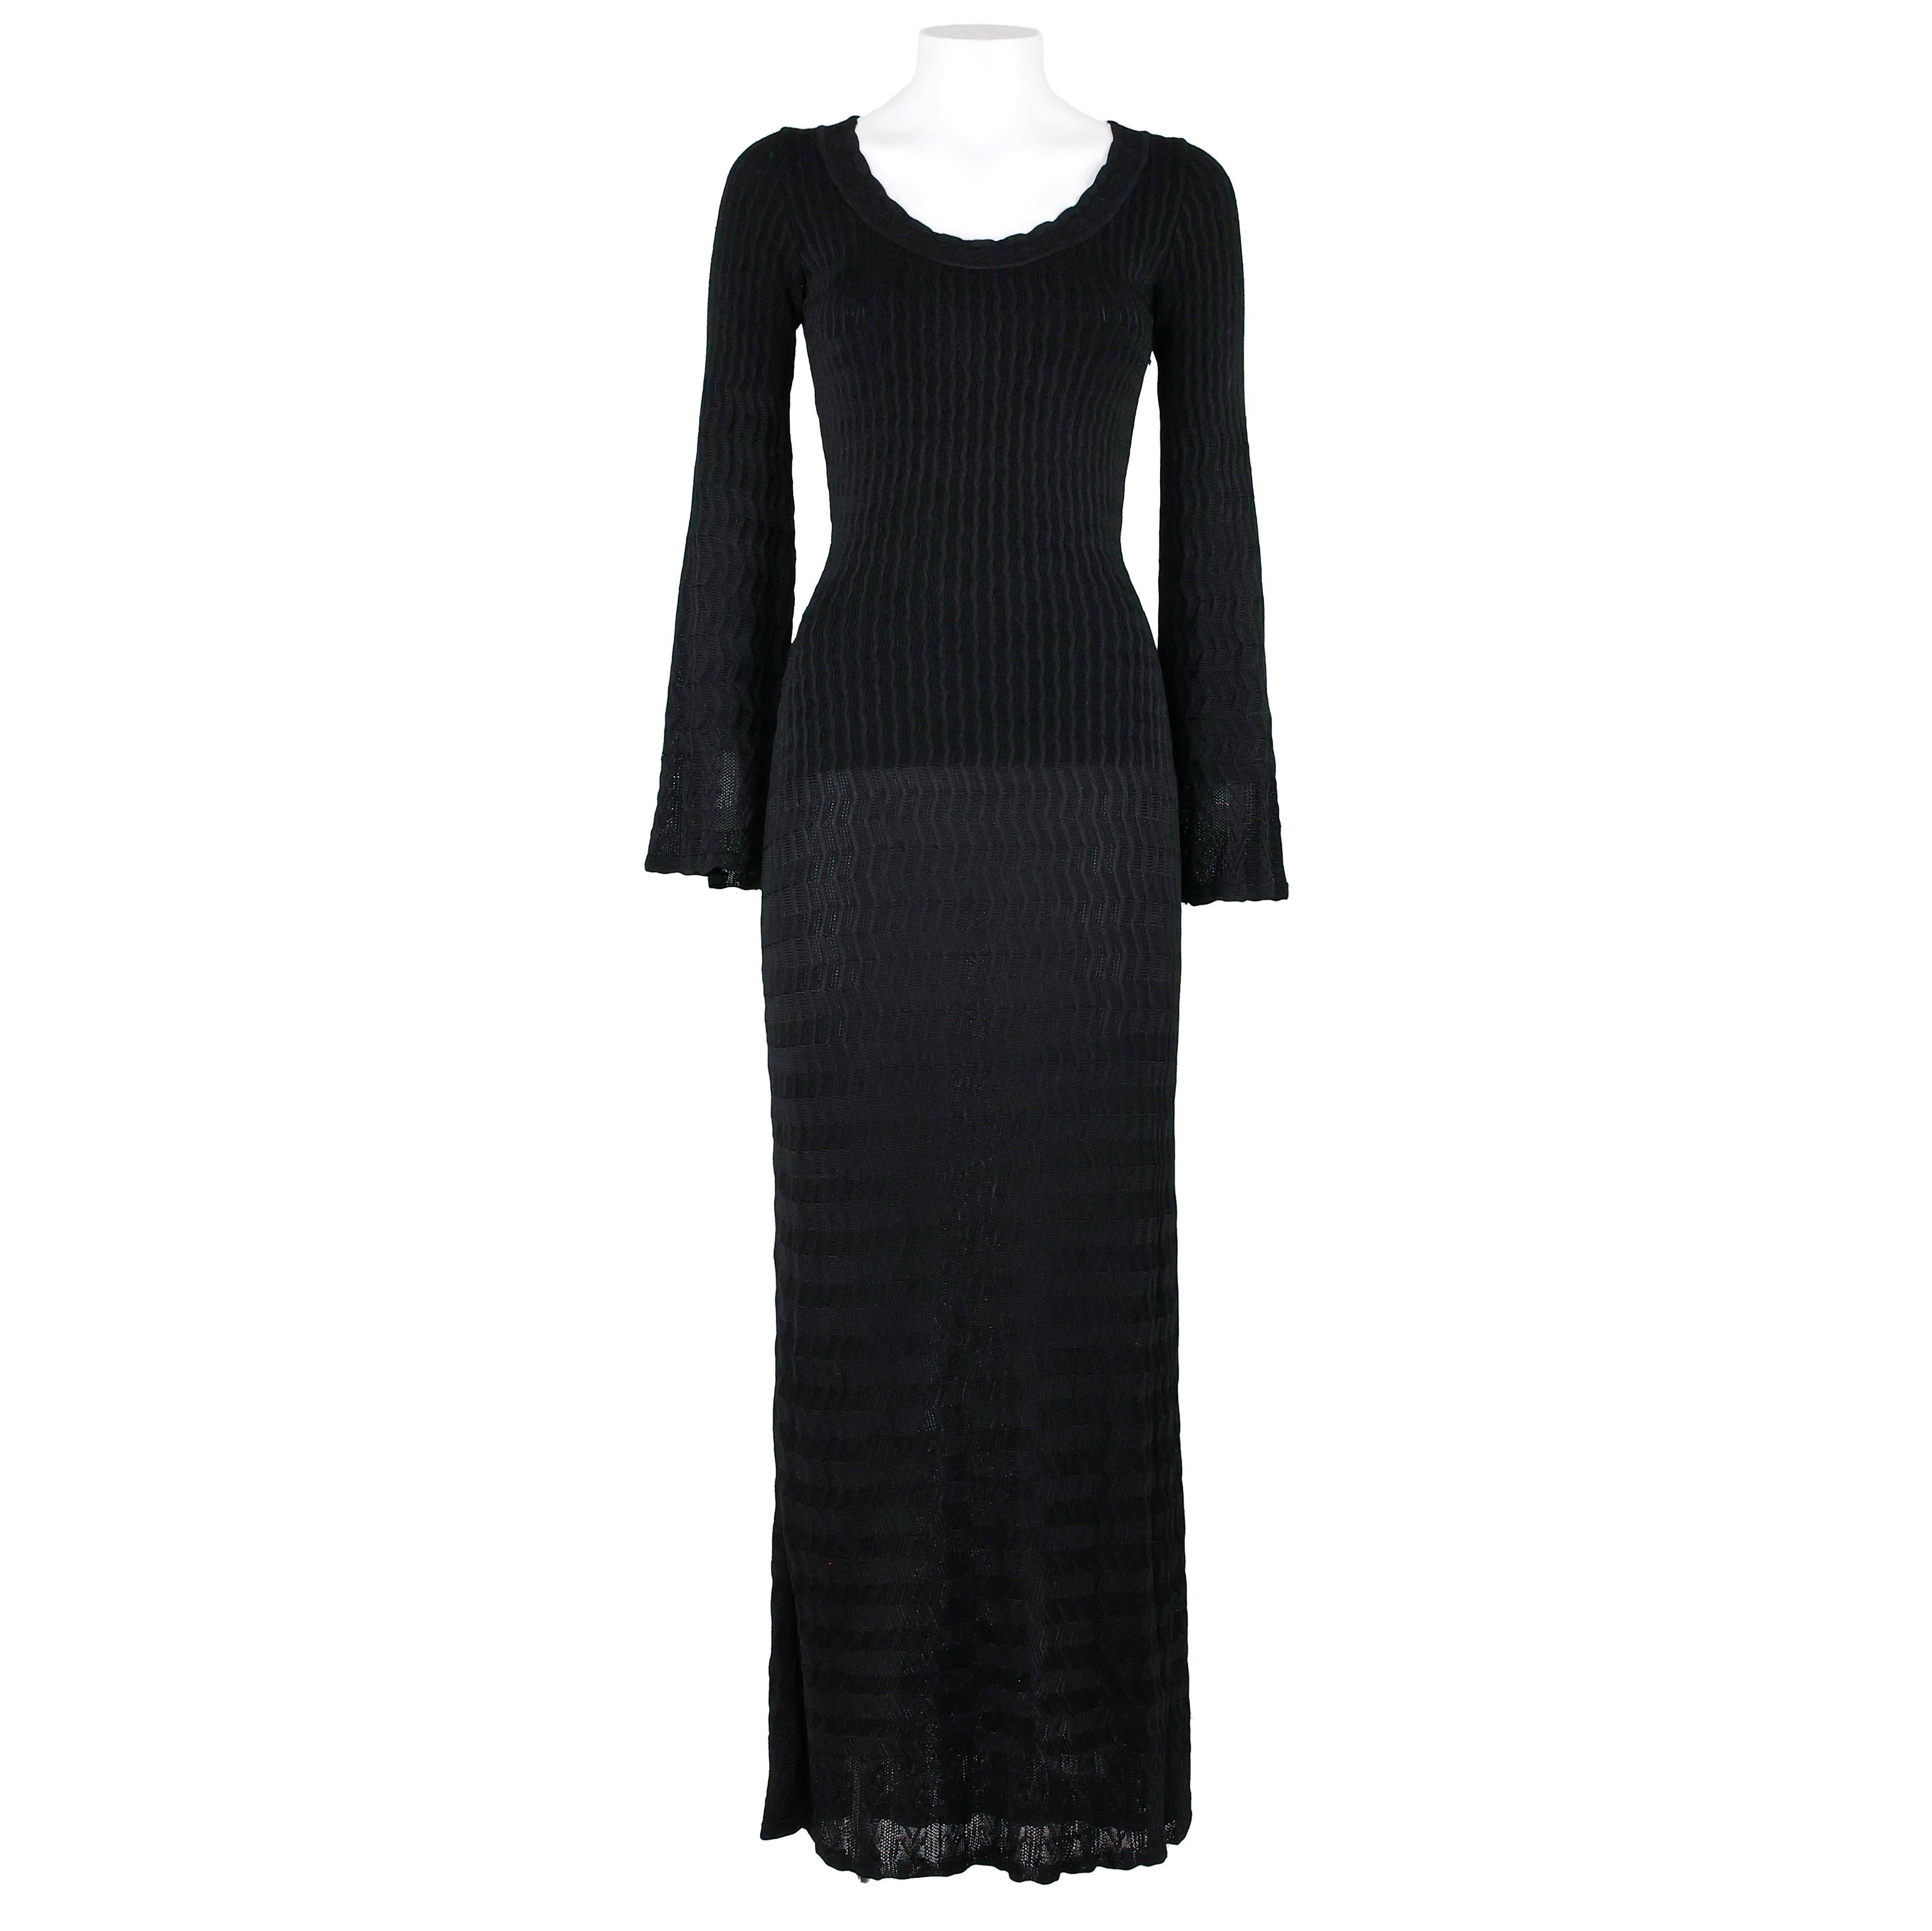 Azzedine Alaia black knit maxi stretch dress, long sleeves flared cuffs and flare skirt, zipper closure. Can be worn off shoulder or dancer neckline. Size 38 FR.

Measurements:
Shoulders 31cm
Chest 34cm
Waist 29cm
Length 147cm